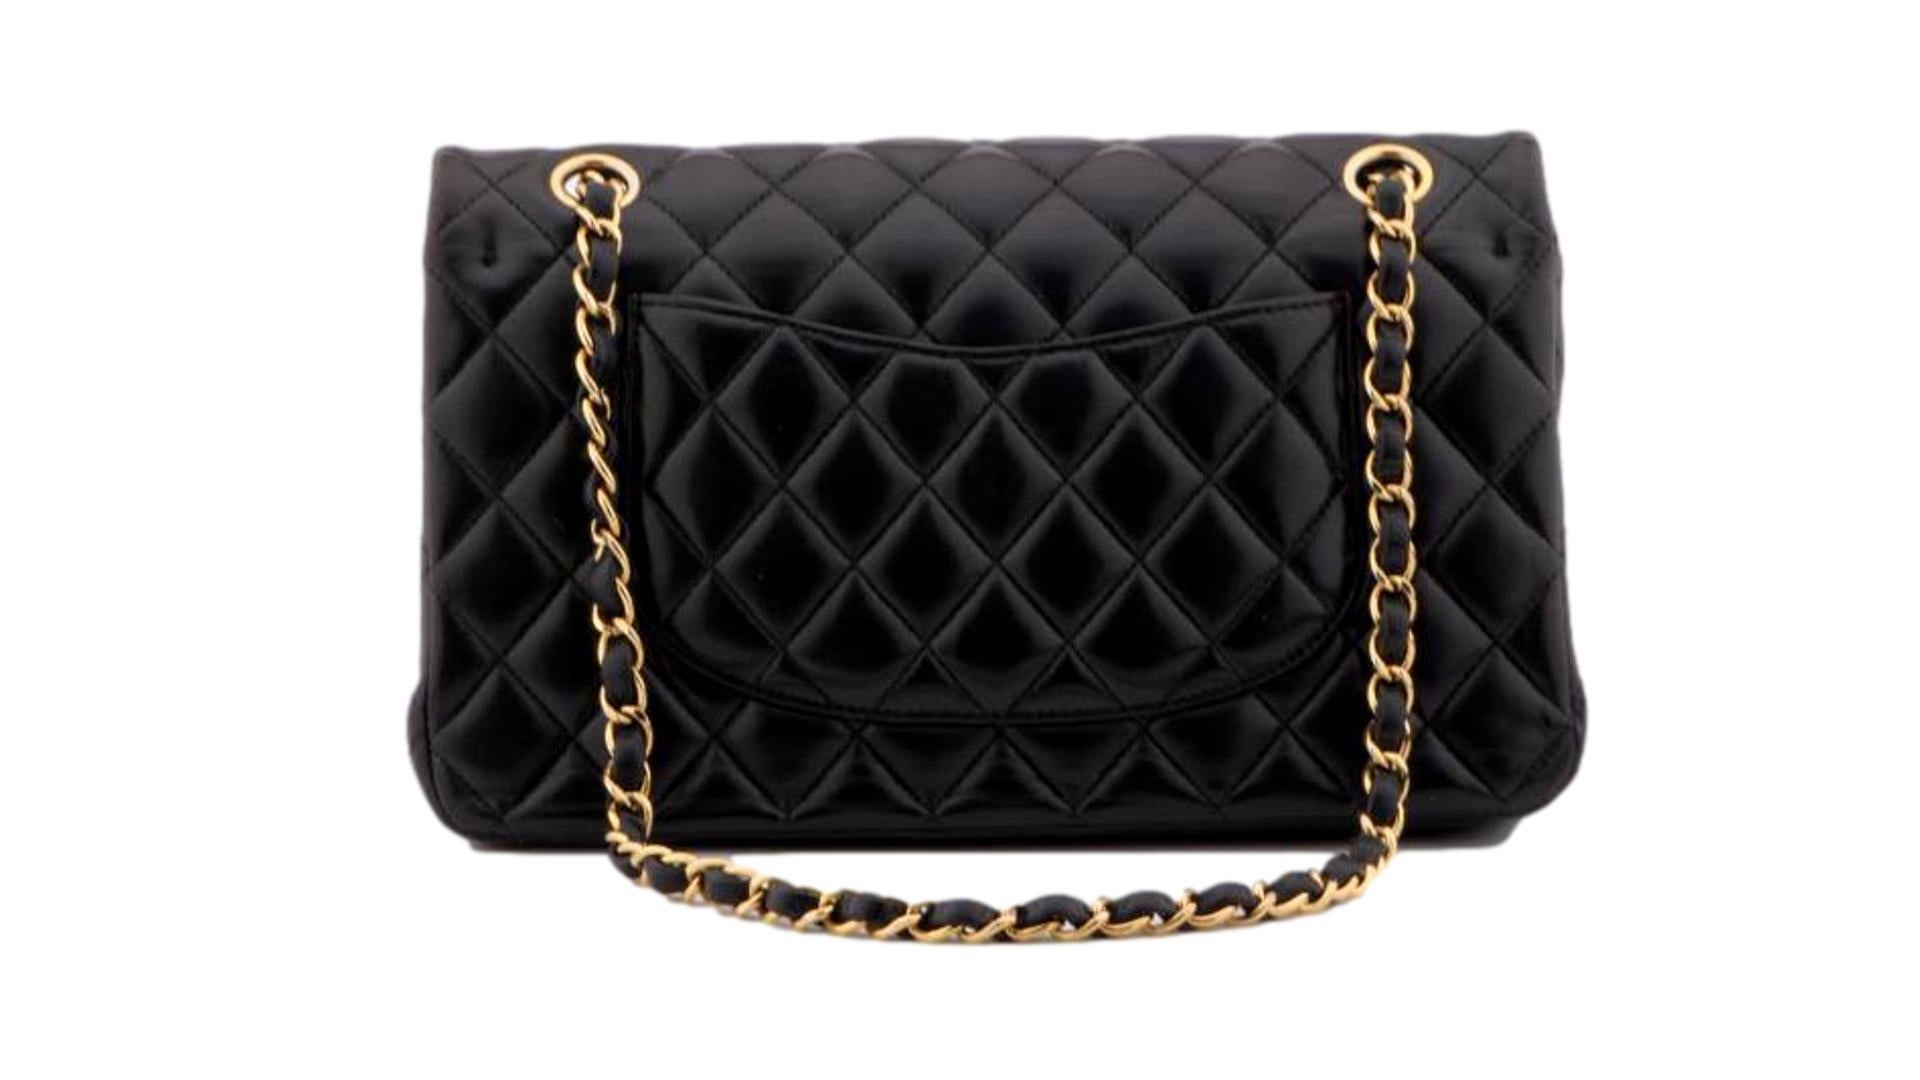 SKU 	AT-1891
Brand	Chanel
Model	Timeless Classic
Serial No.	24******
Color	Black
Date	Approx. 2017
Metal	Gold
Material	Lambskin
Measurements	Approx. 25 x 15 x 7 cm
Condition	Excellent 
Comes with	Chanel Dust bag and authentic card

If you are